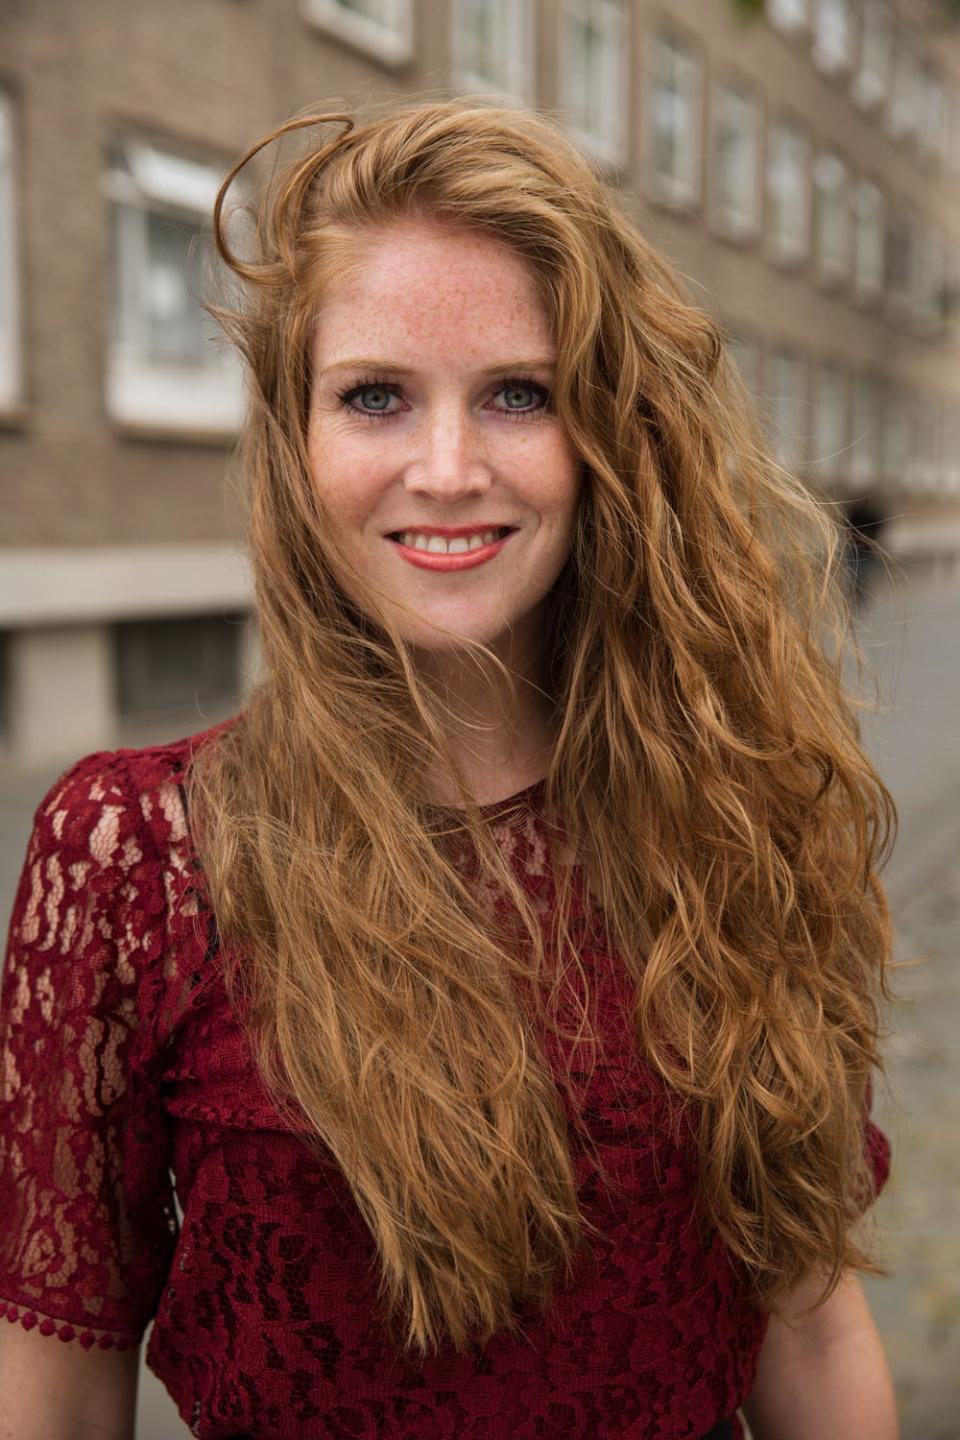 A redhead named Judith from Breda, Netherlands, poses outside